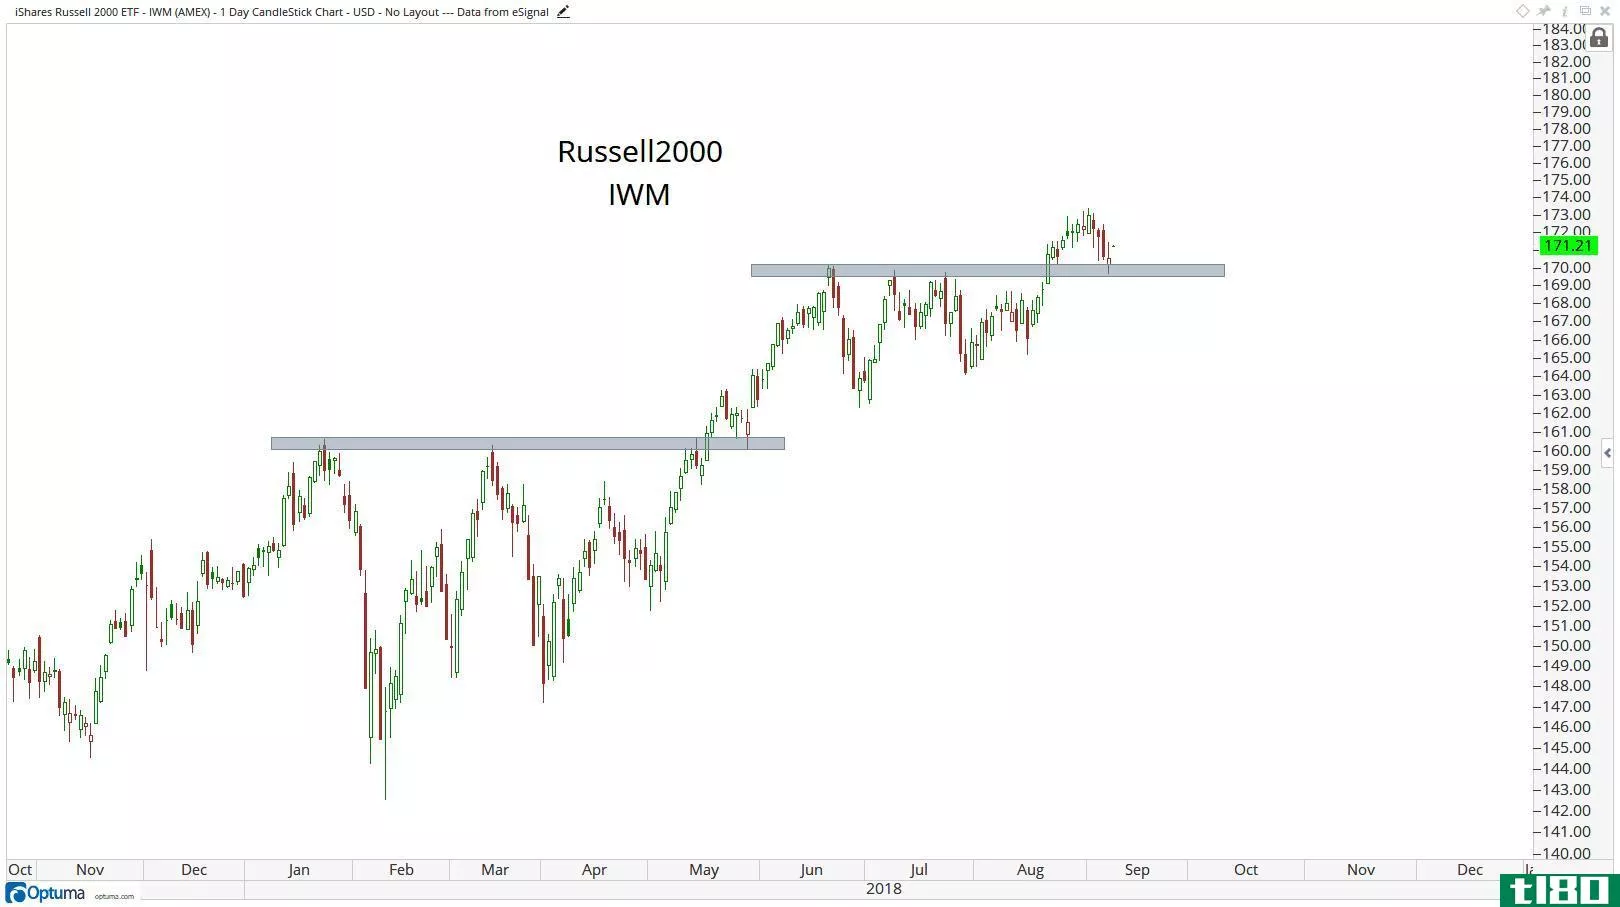 Technical chart showing the performance of the the iShares Russell 2000 ETF (IWM)